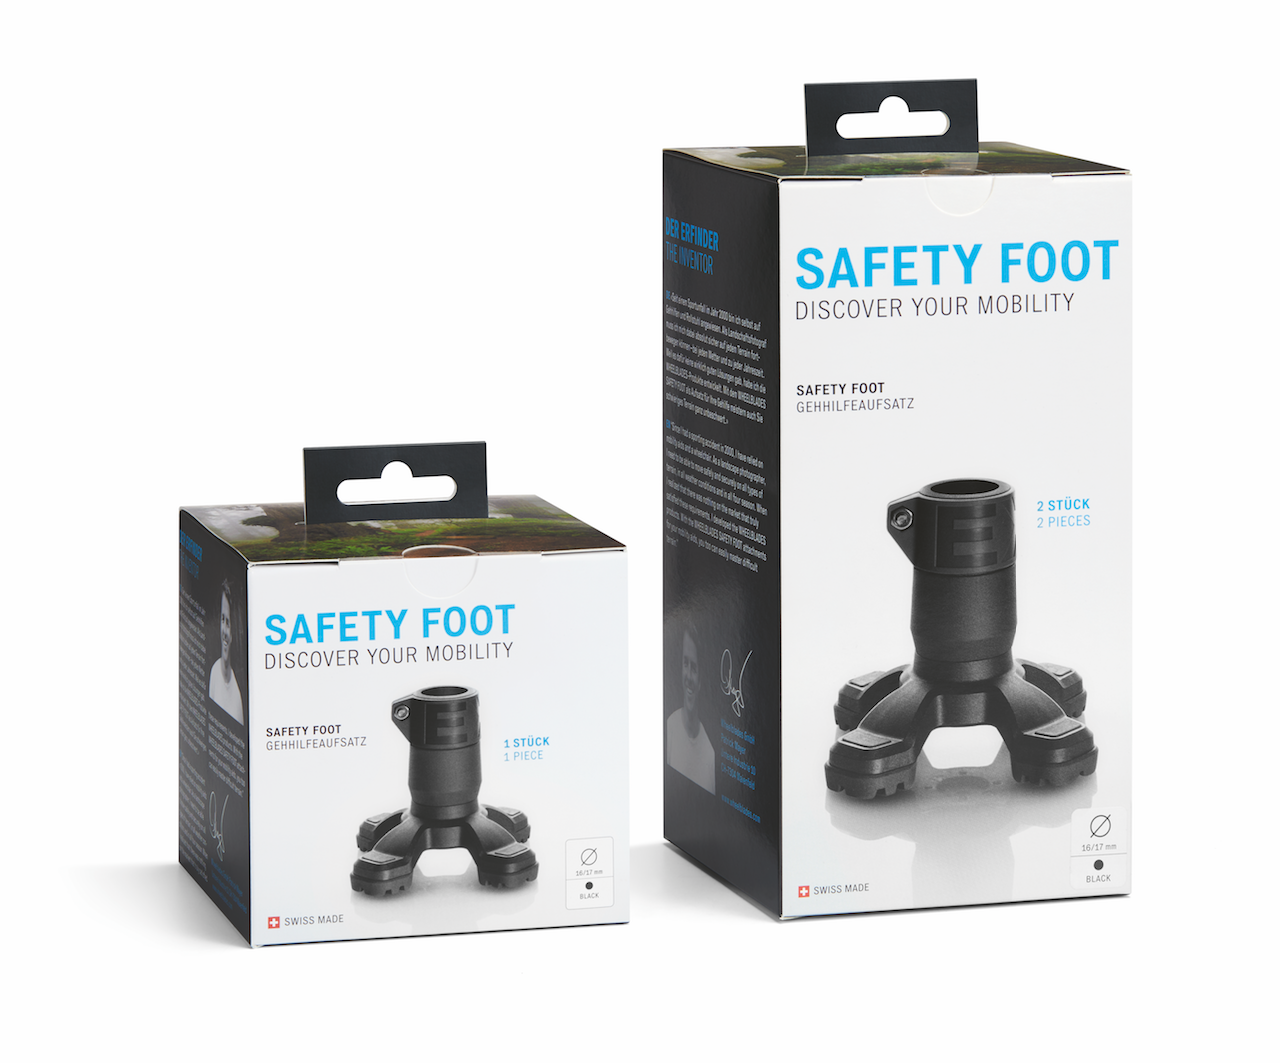 SAFETY FOOT, 1 PAAR